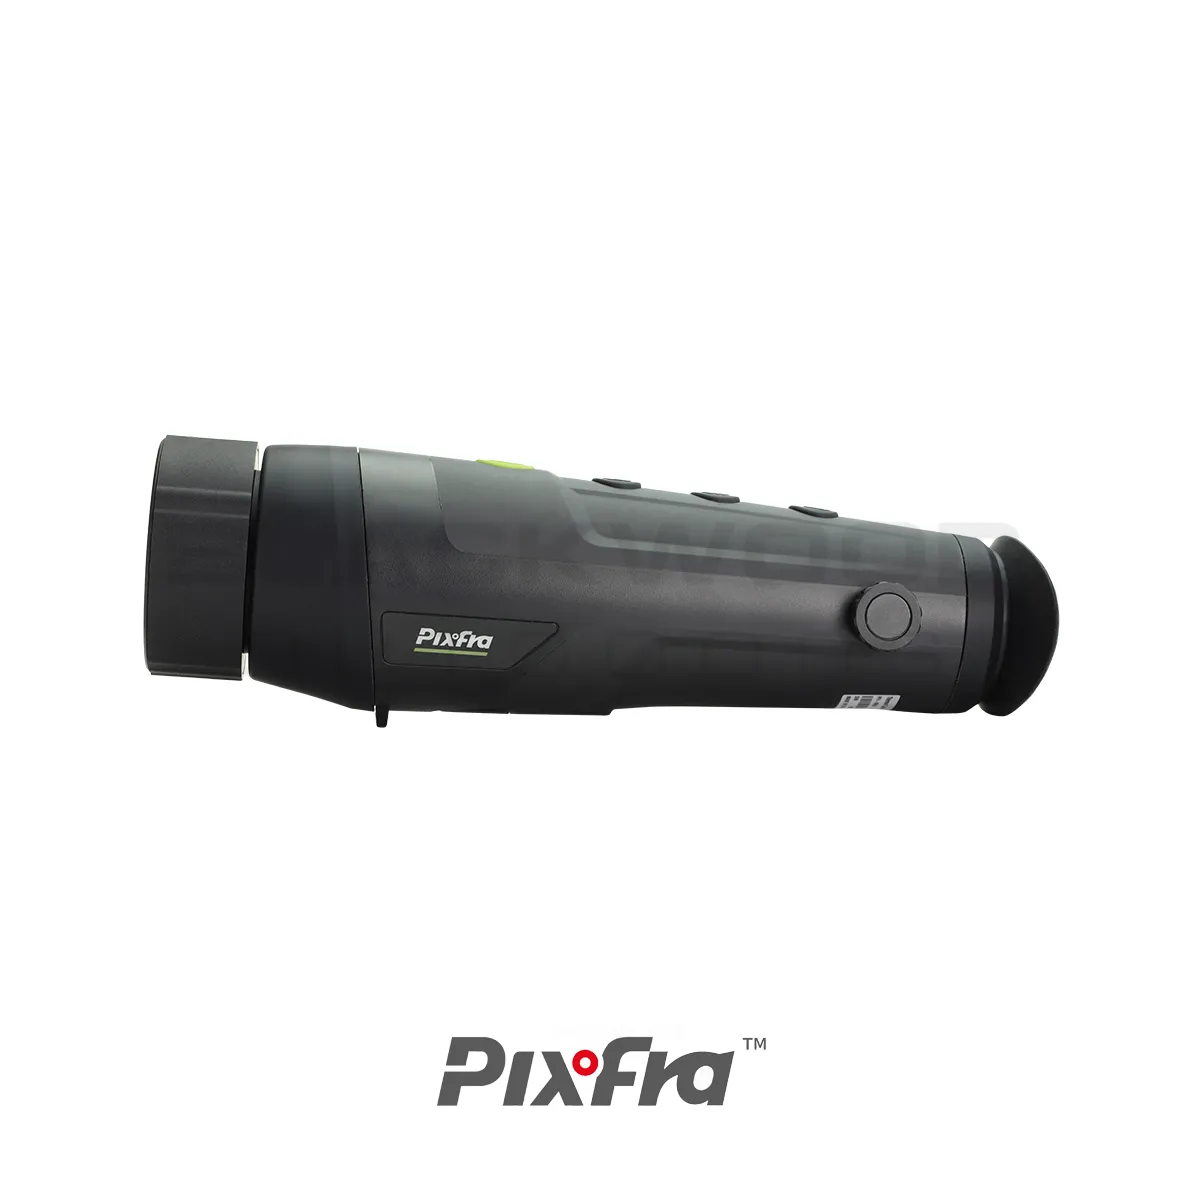 Pixfra Ranger R650 Thermal Side View